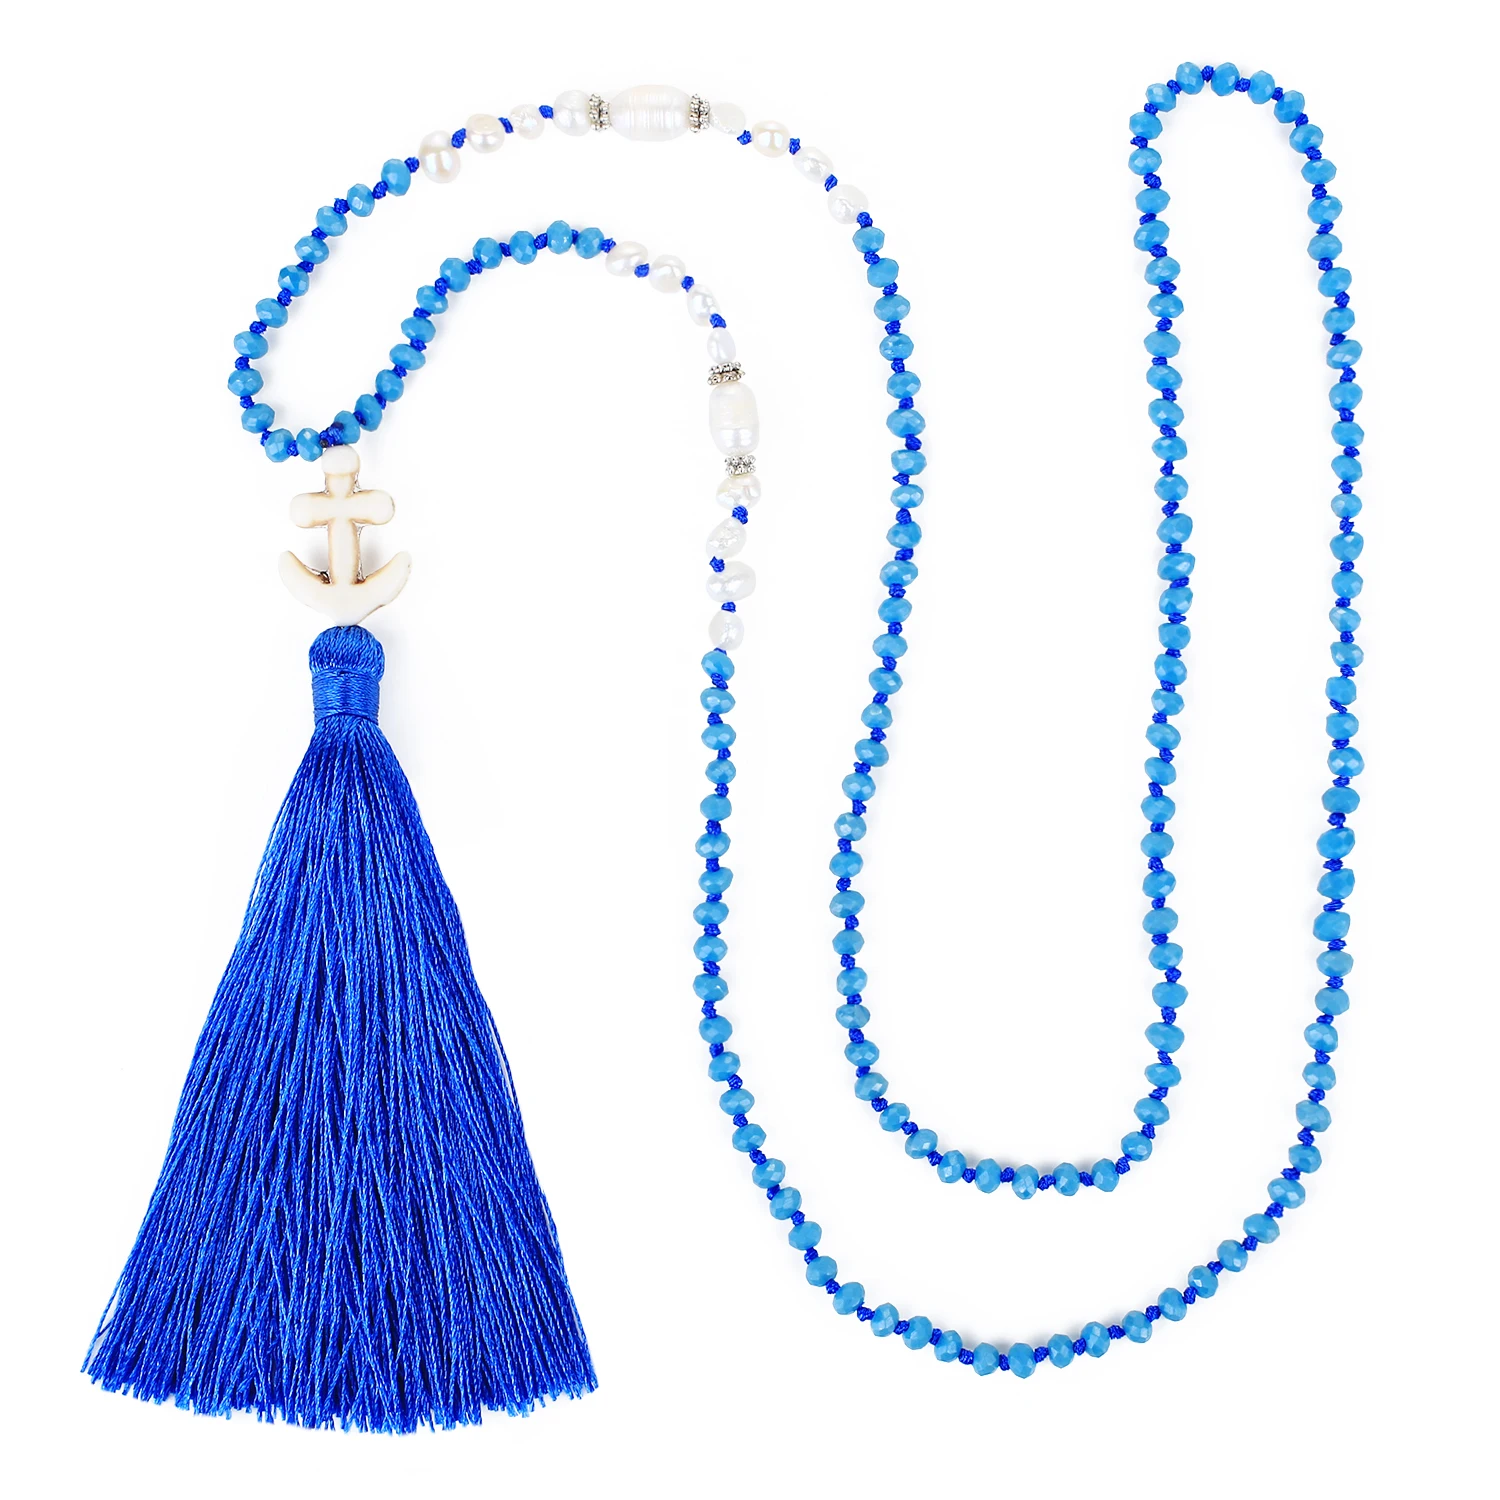 

KELITCH New 2022 Anchor Pendant Long Tassel Pearl Necklaces Beaded Friends Mall Goth Key Chain Aesthetic Tous Jewelry